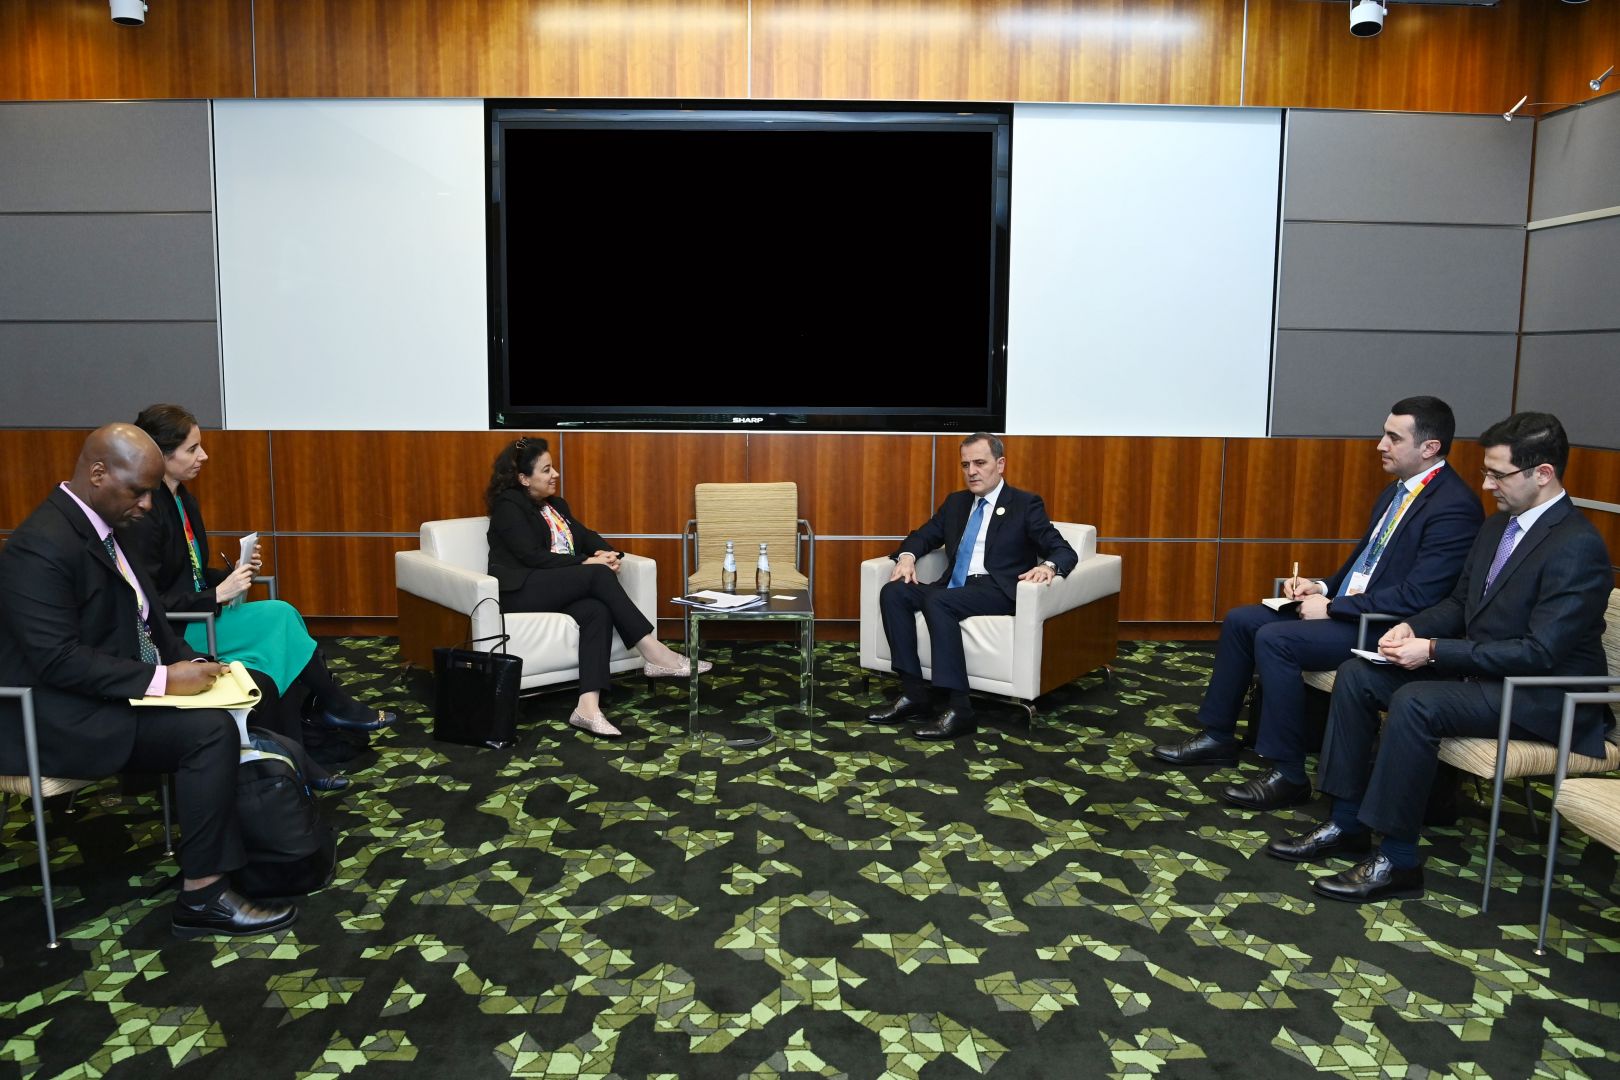 Azerbaijani Foreign Minister meets with UN officials during visit in Qatar [PHOTO]